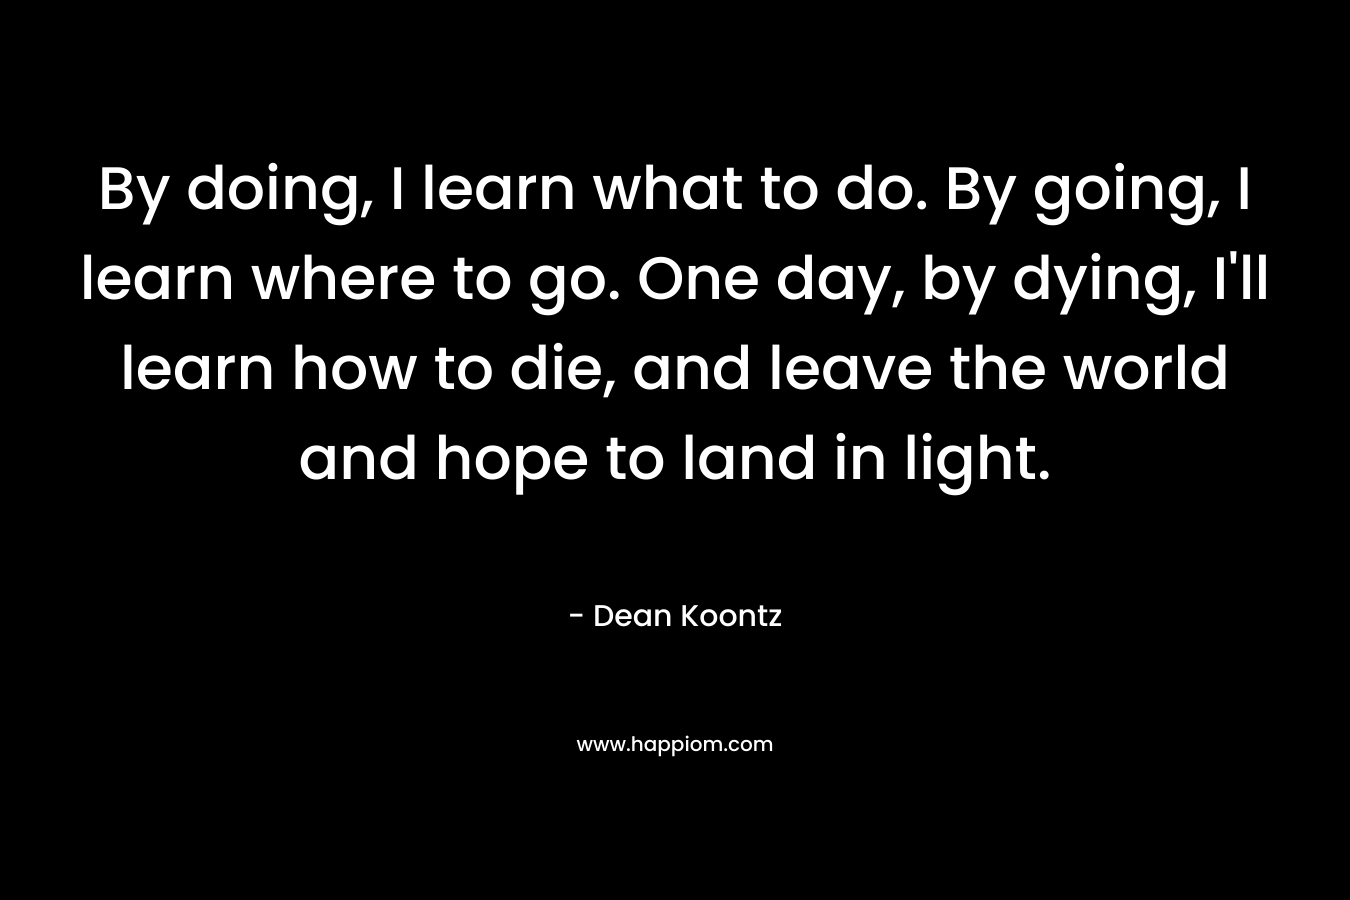 By doing, I learn what to do. By going, I learn where to go. One day, by dying, I'll learn how to die, and leave the world and hope to land in light.